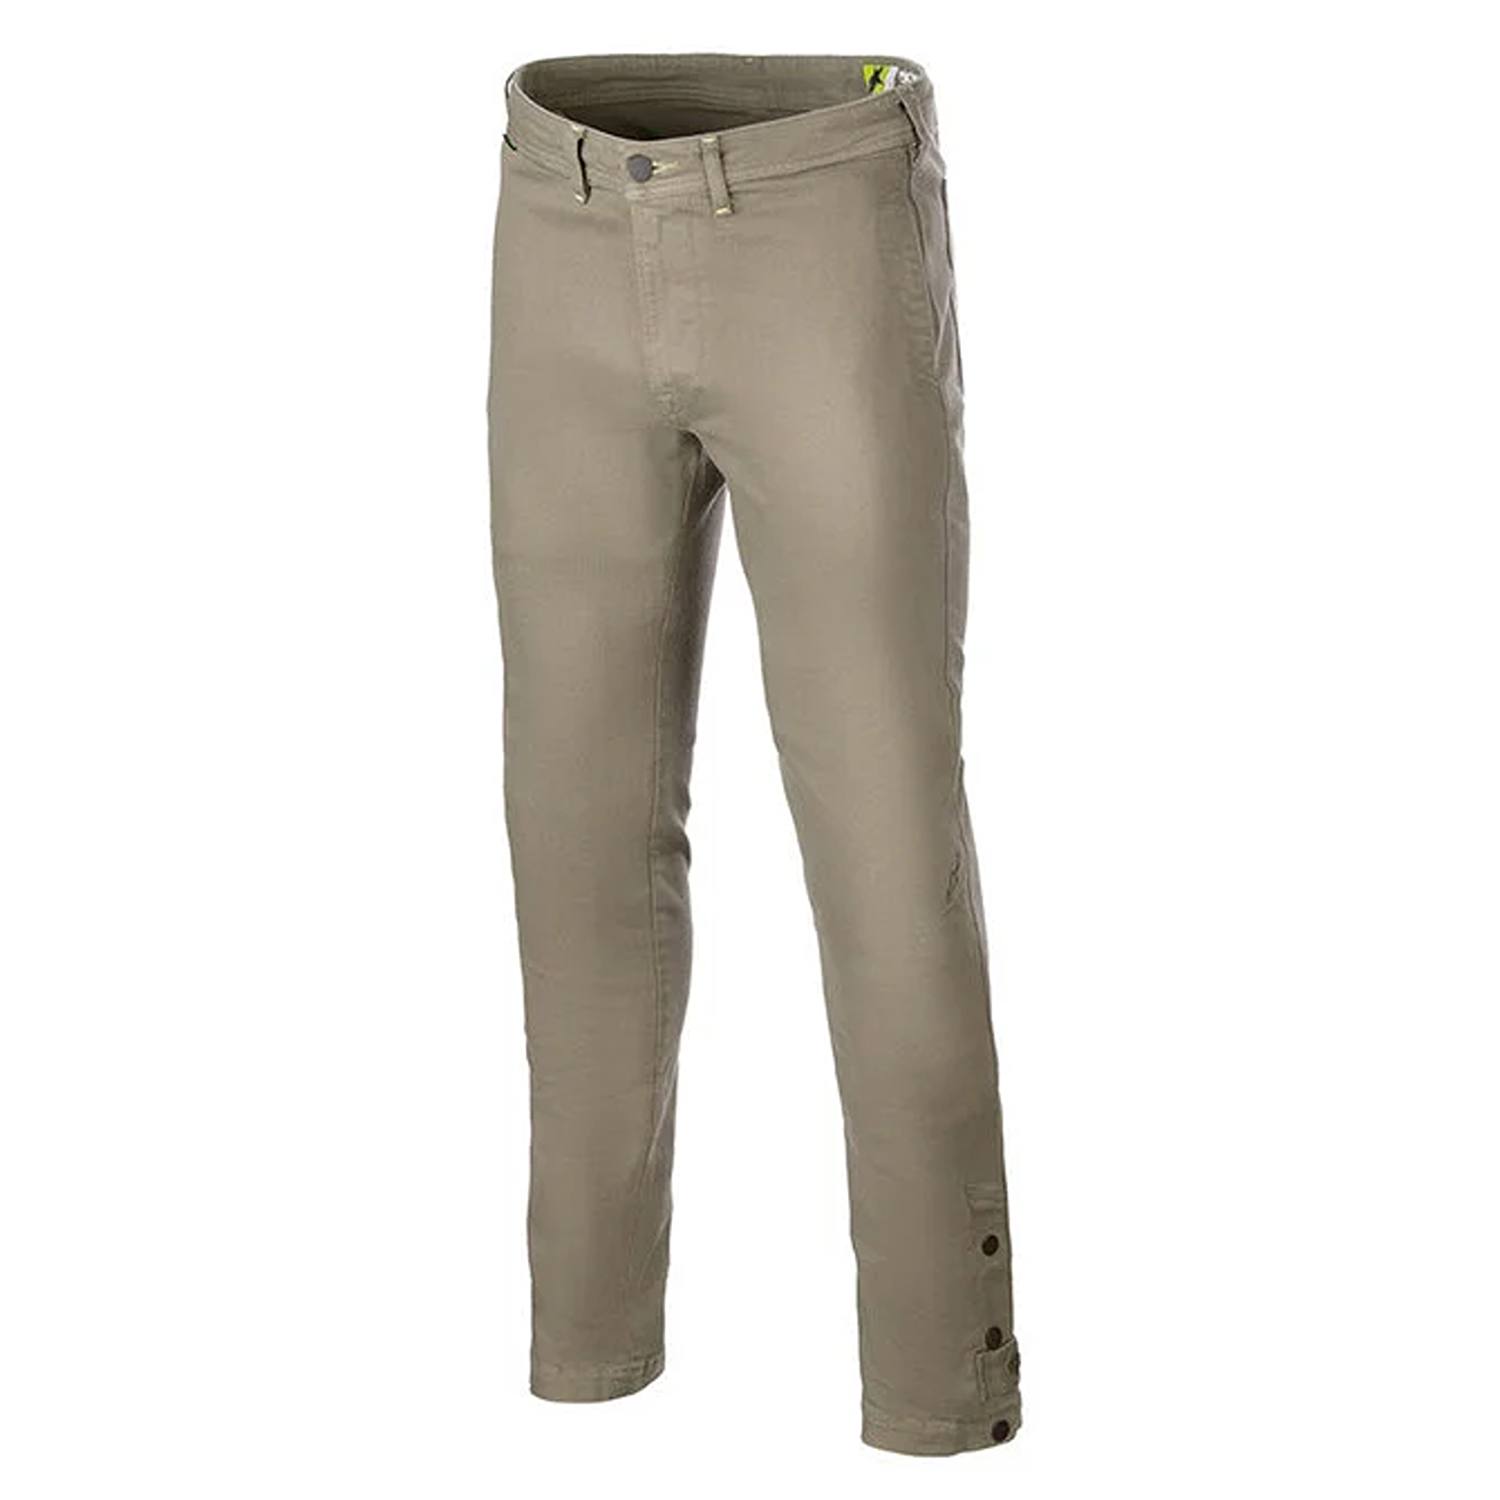 Image of Alpinestars Stratos Regular Fit Tech Riding Pants Military Green Taille 32